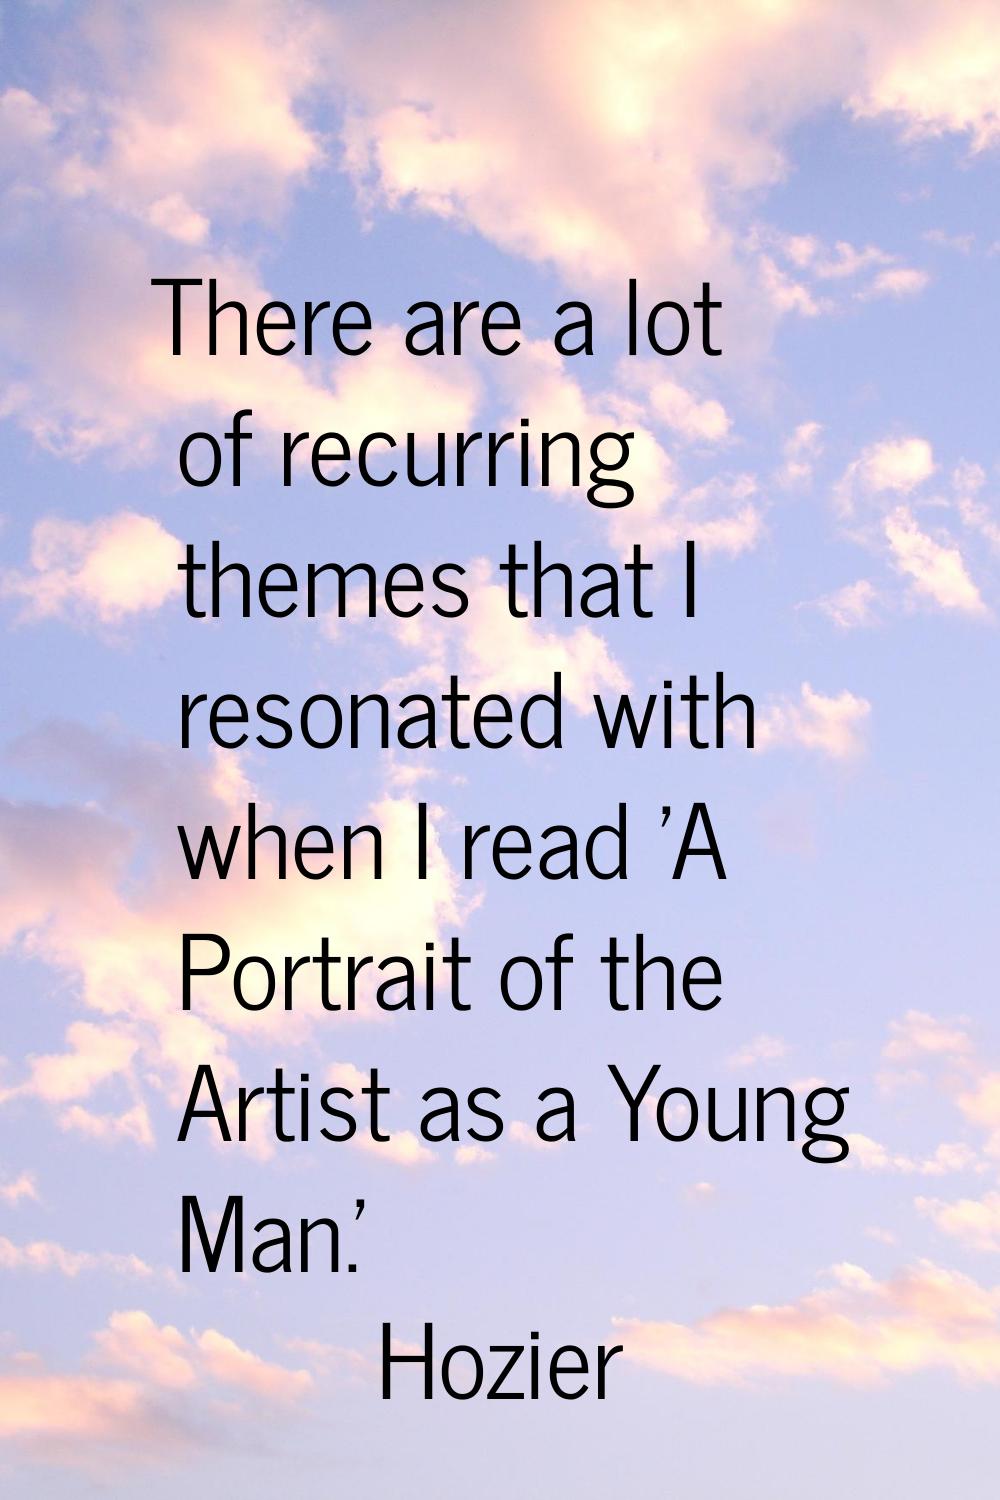 There are a lot of recurring themes that I resonated with when I read 'A Portrait of the Artist as 